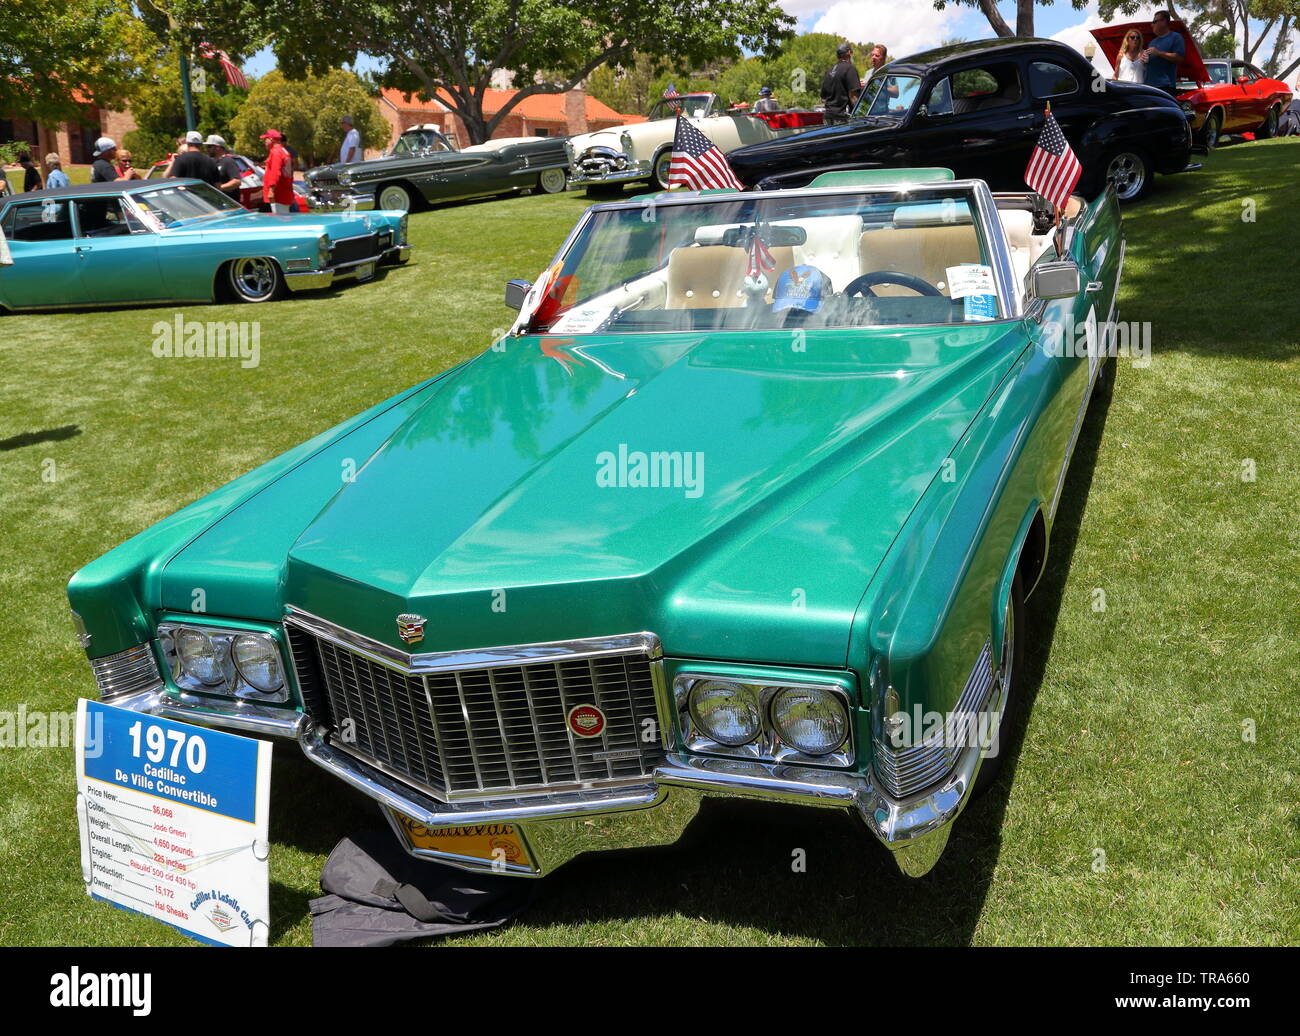 A green 1970 Cadillac De Ville Convertible amongst vintage vehicles and Hot Rods at a memorial day event at Boulder City, Nevada, USA Stock Photo